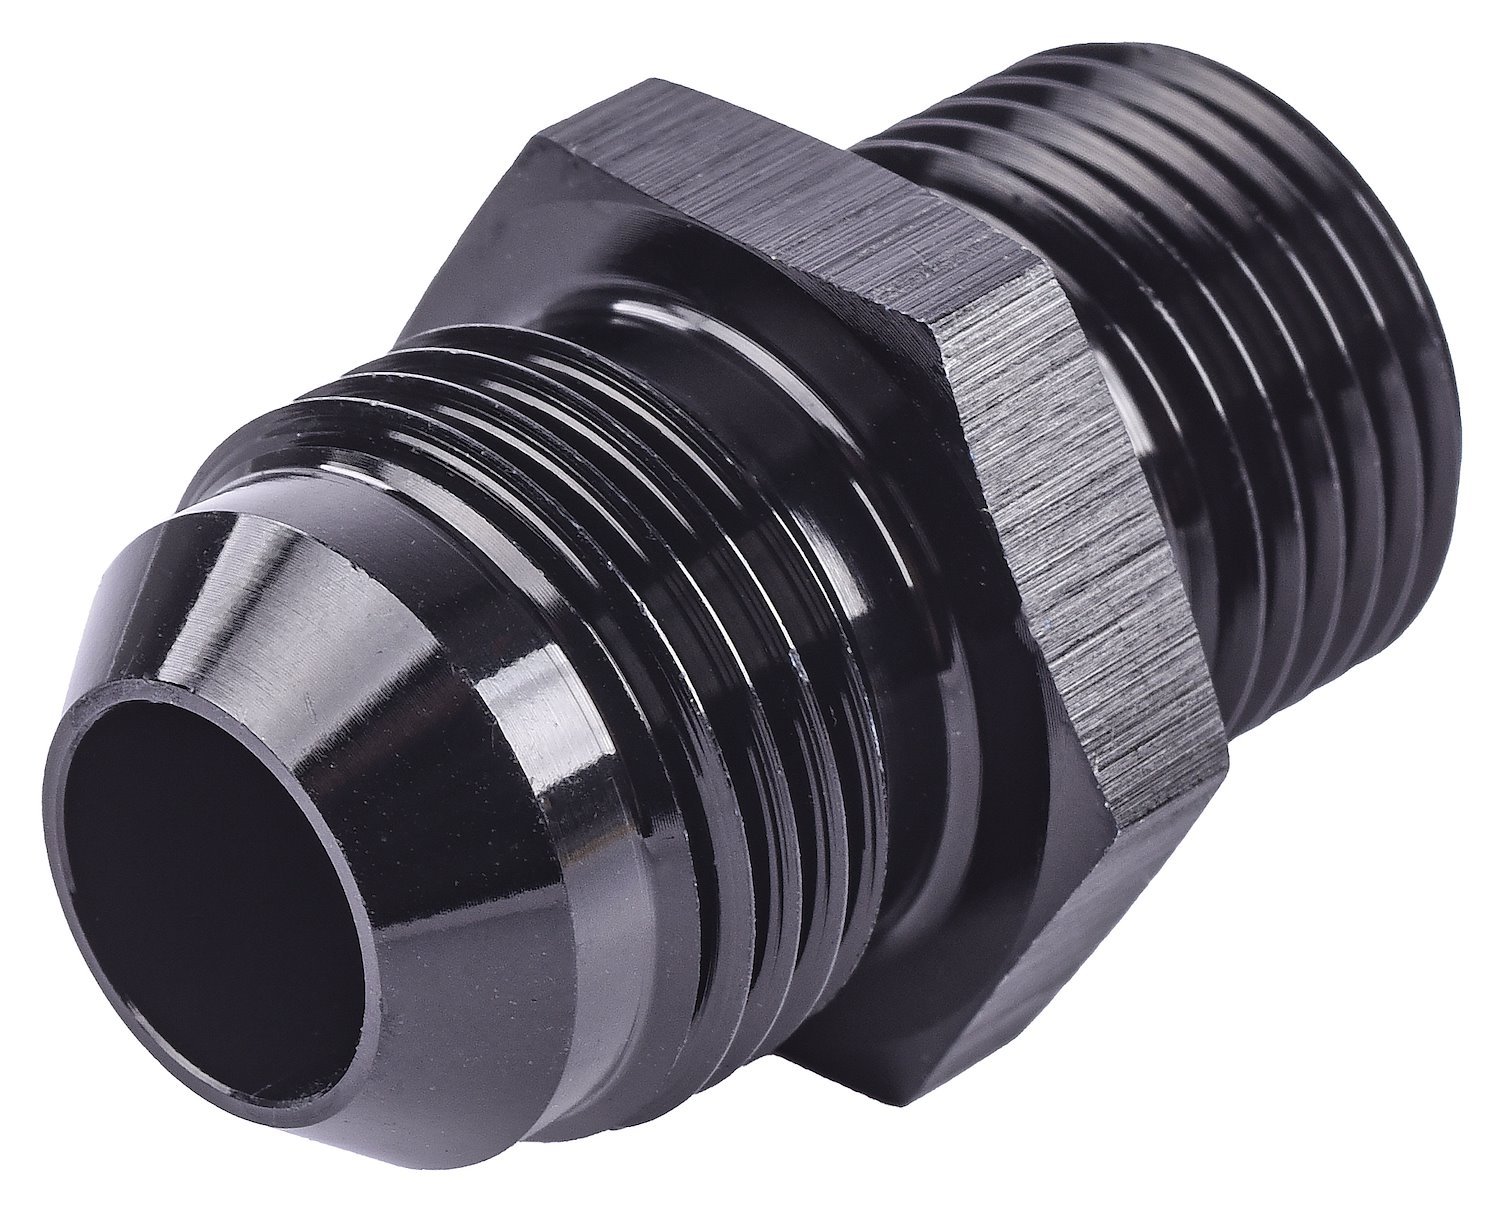 AN to Metric Adapter Fitting [-8 AN Male to 18mm x 1.5 Male]